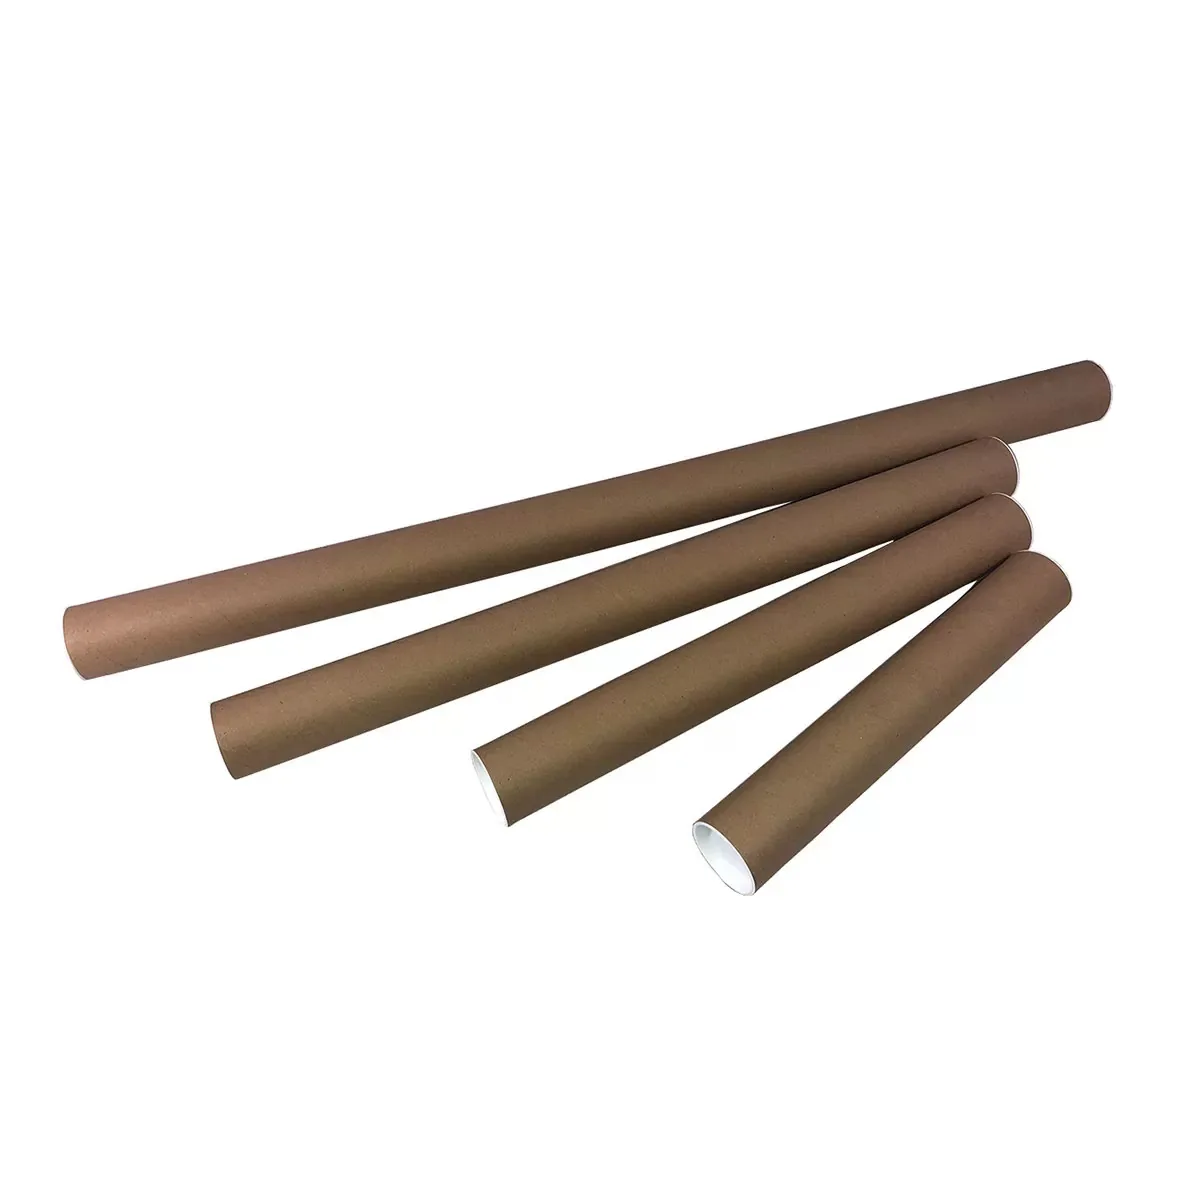 Discover Our Extensive Selection Of Cardboard Postal Tubes At Packaging Now